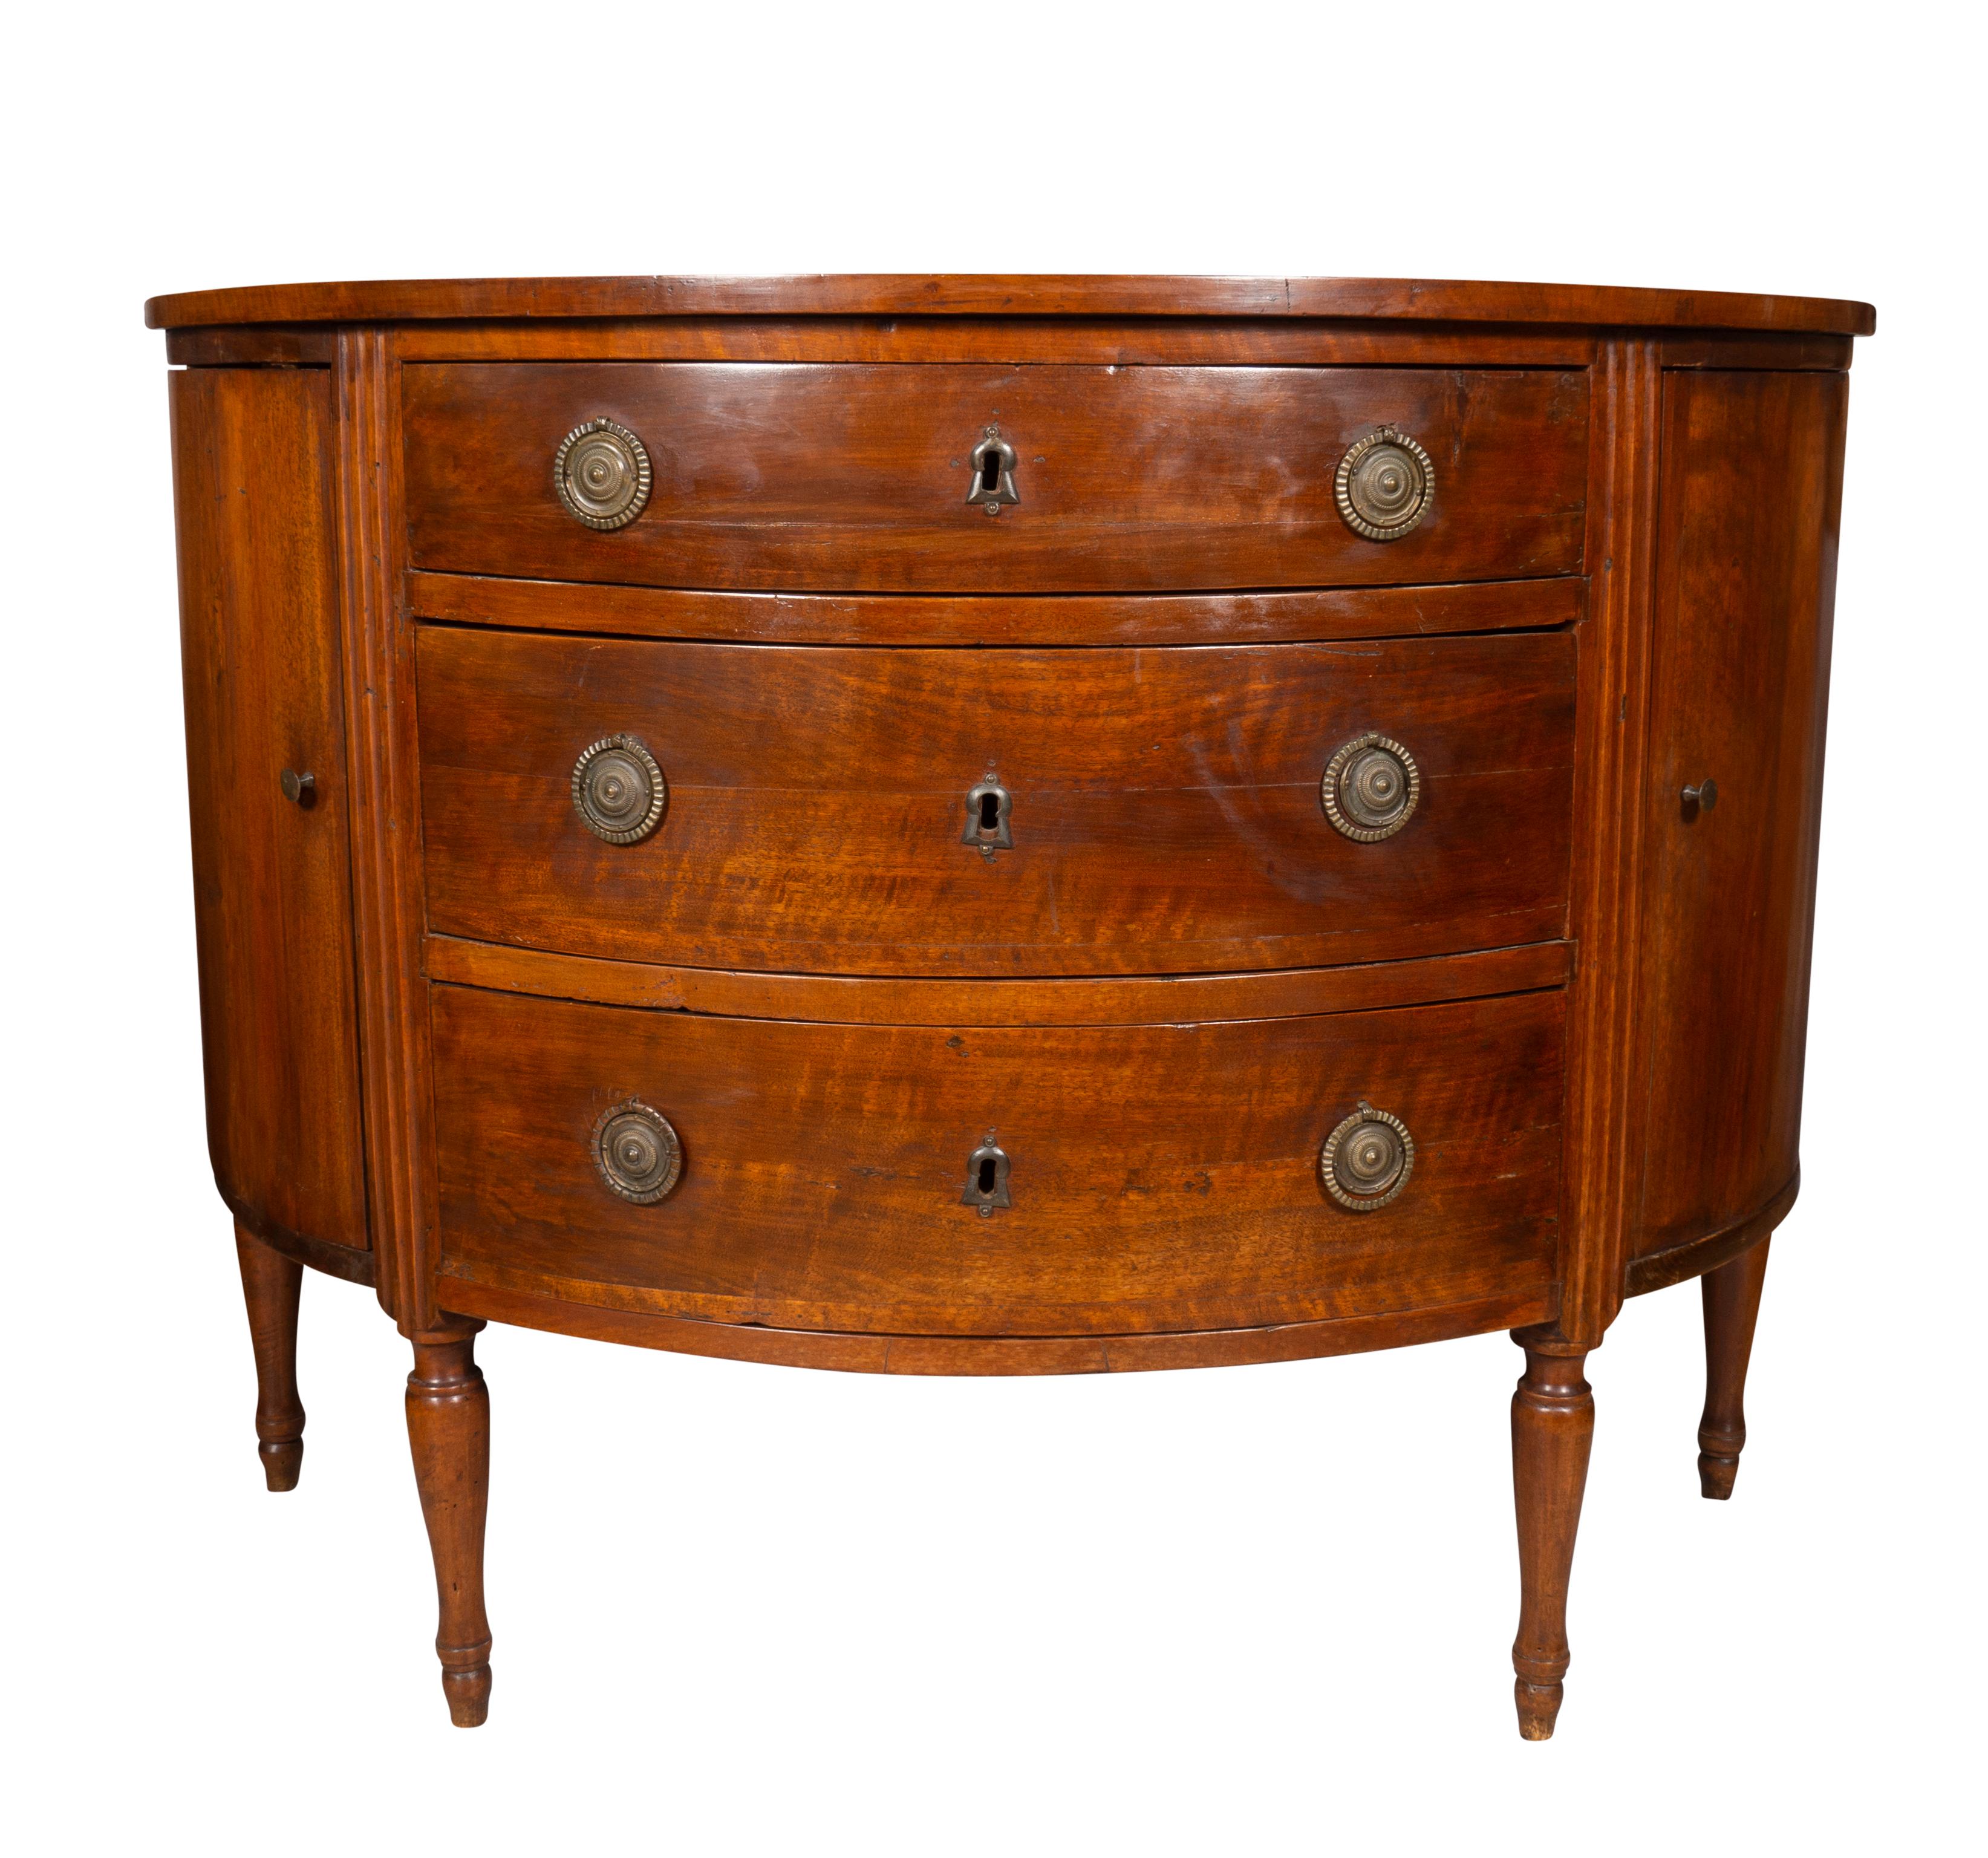 A hard to find form. With a demilune top over a conforming case with three drawers with brass ring handles and round backplates flanked by fluted columns and a pair of cabinet doors enclosing shelves, raised on circular tapered legs.